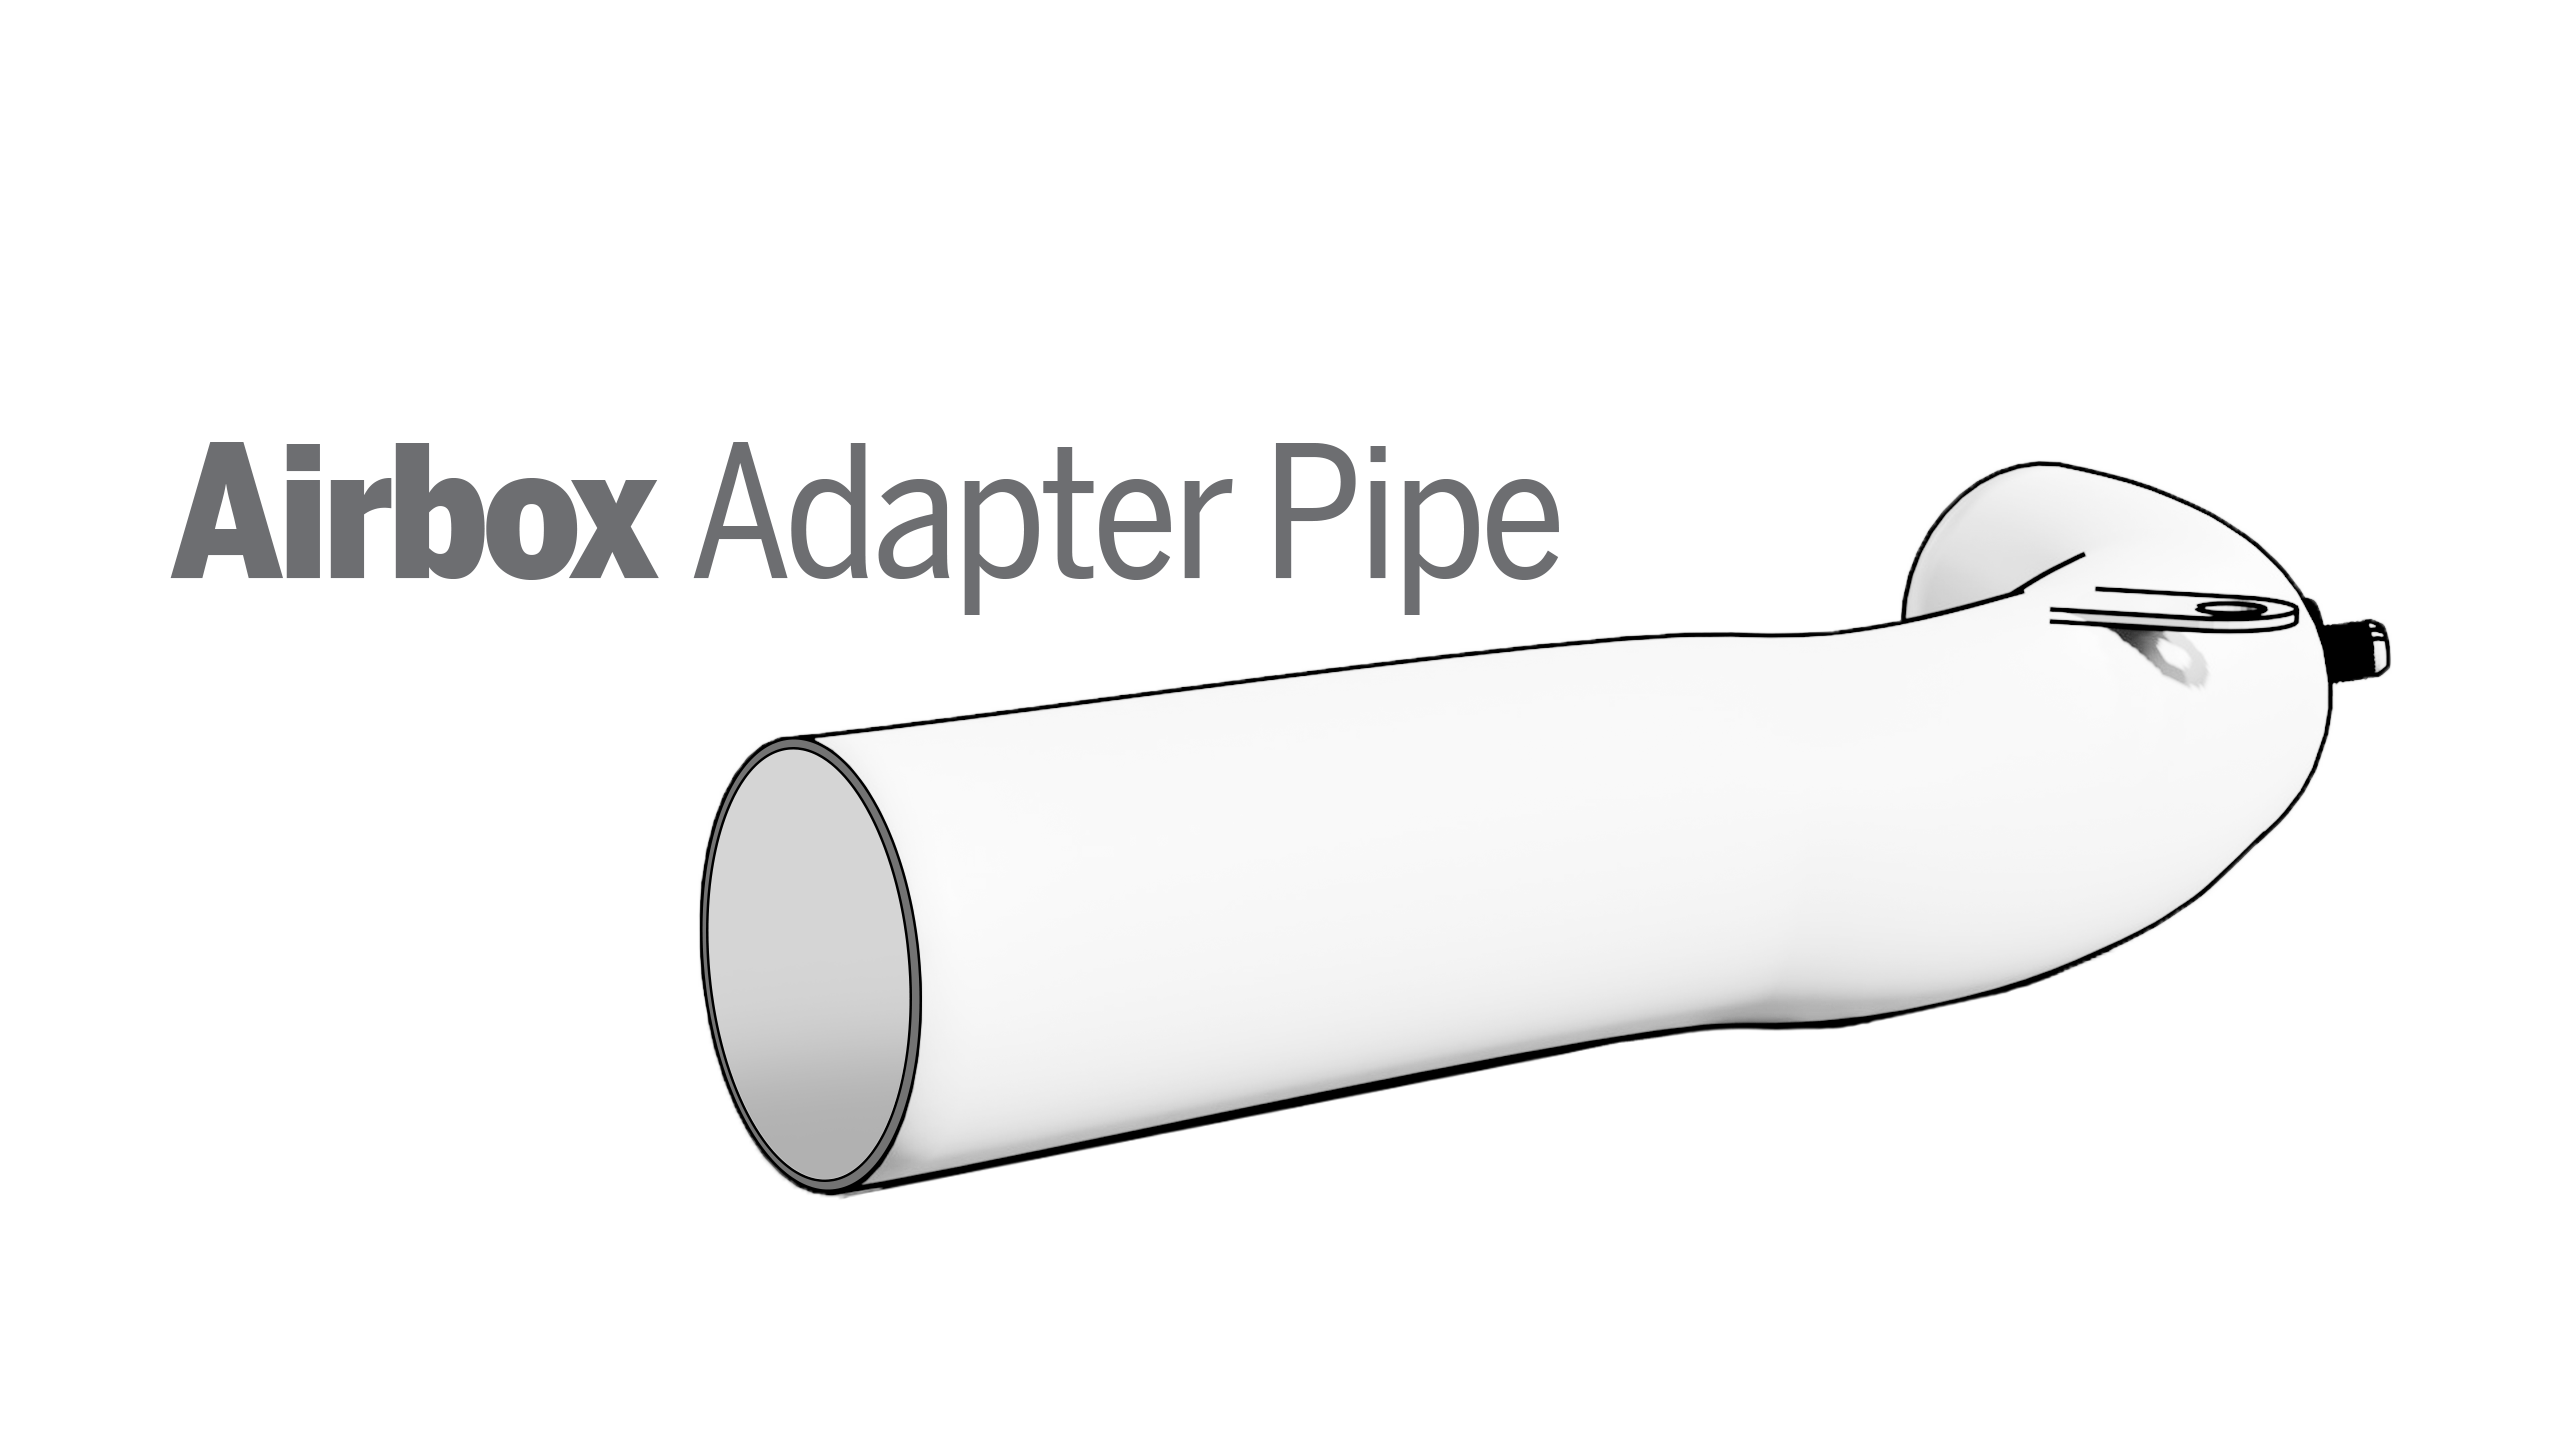 Airbox Adapter Pipe